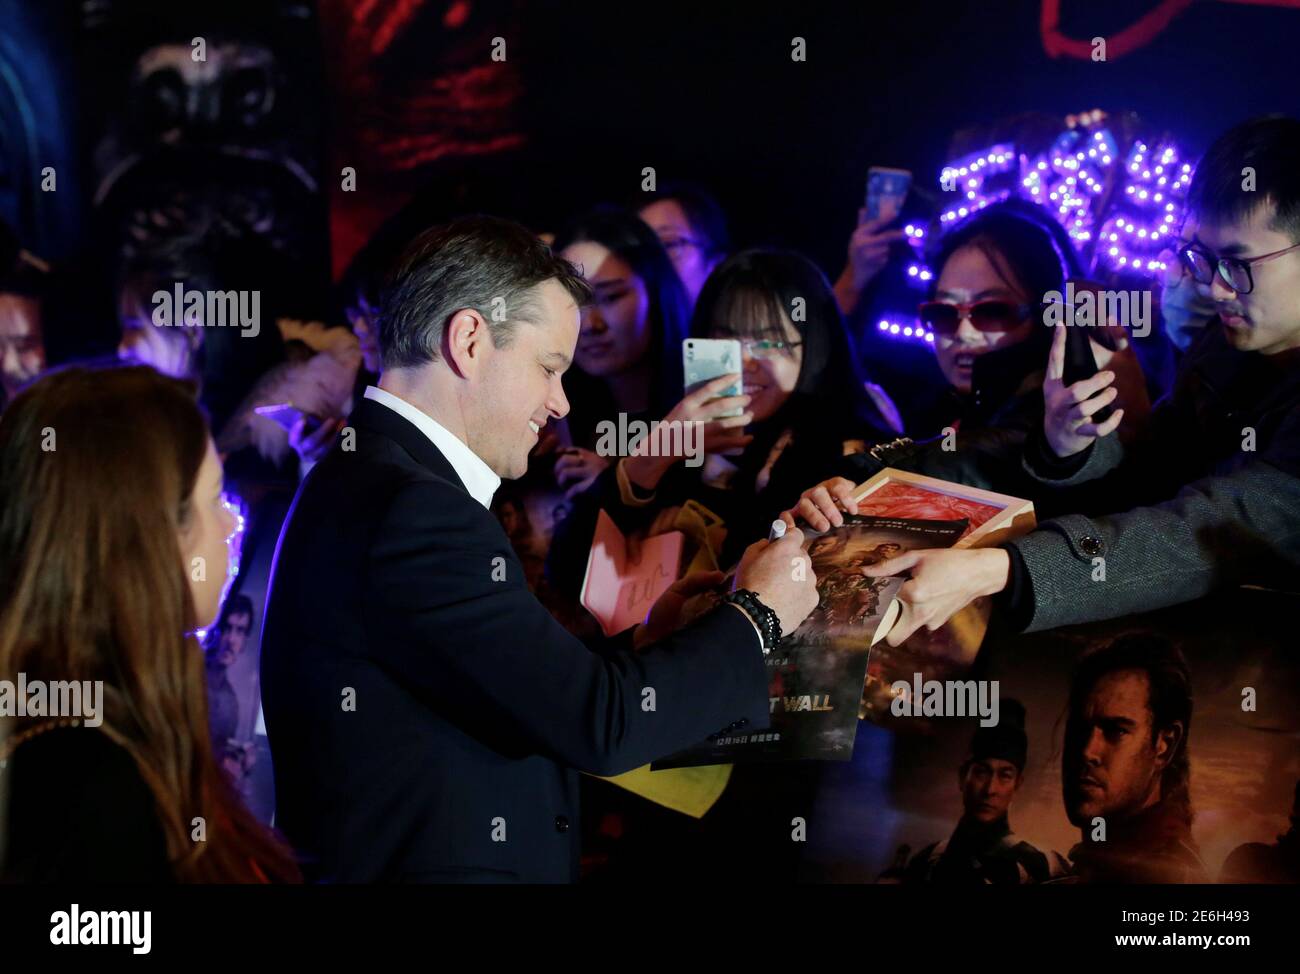 Actor Matt Damon attends a red carpet event promoting Chinese director Zhang Yimou's latest film 'Great Wall' in Beijing, China December 6, 2016. REUTERS/Jason Lee Stock Photo